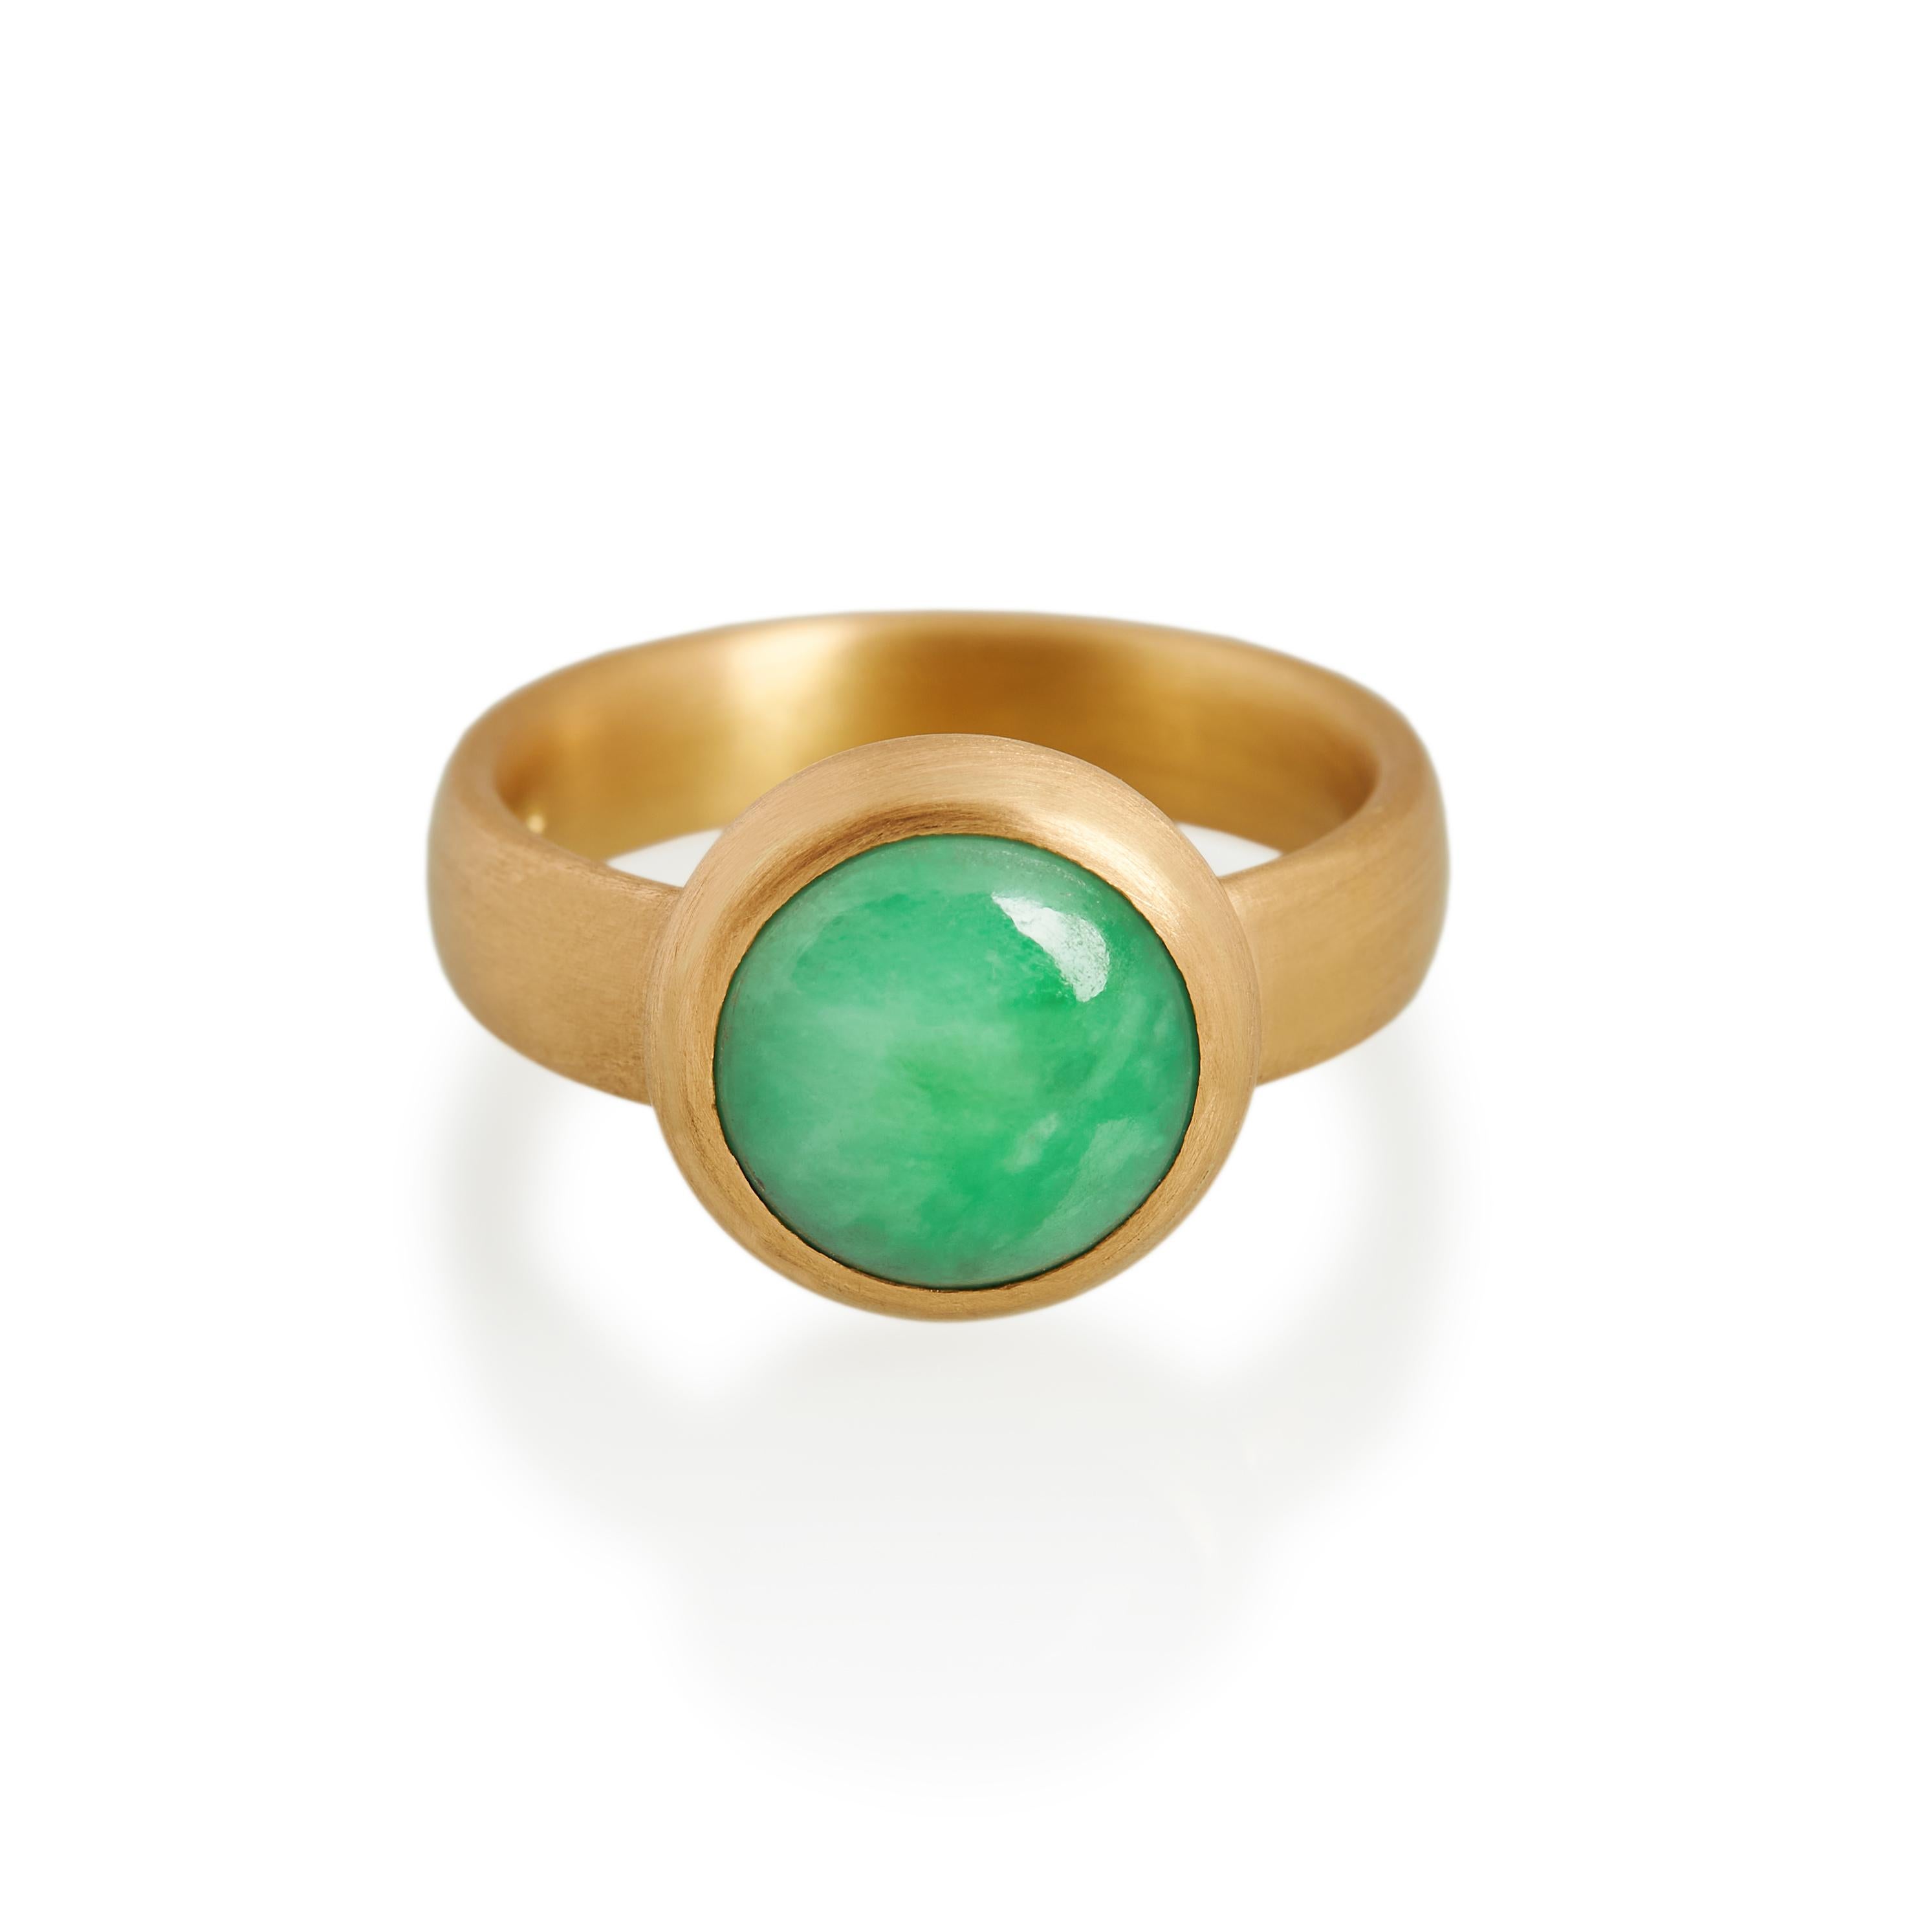 Circular cabochon cut natural antique jade ring. This exquisite vivid green jade is set in matte finished hand carved 22ct gold with a domed back to the setting. 
Ref: G20004

12mm round natural jade 
22ct gold

Cadby & Co are a family business that